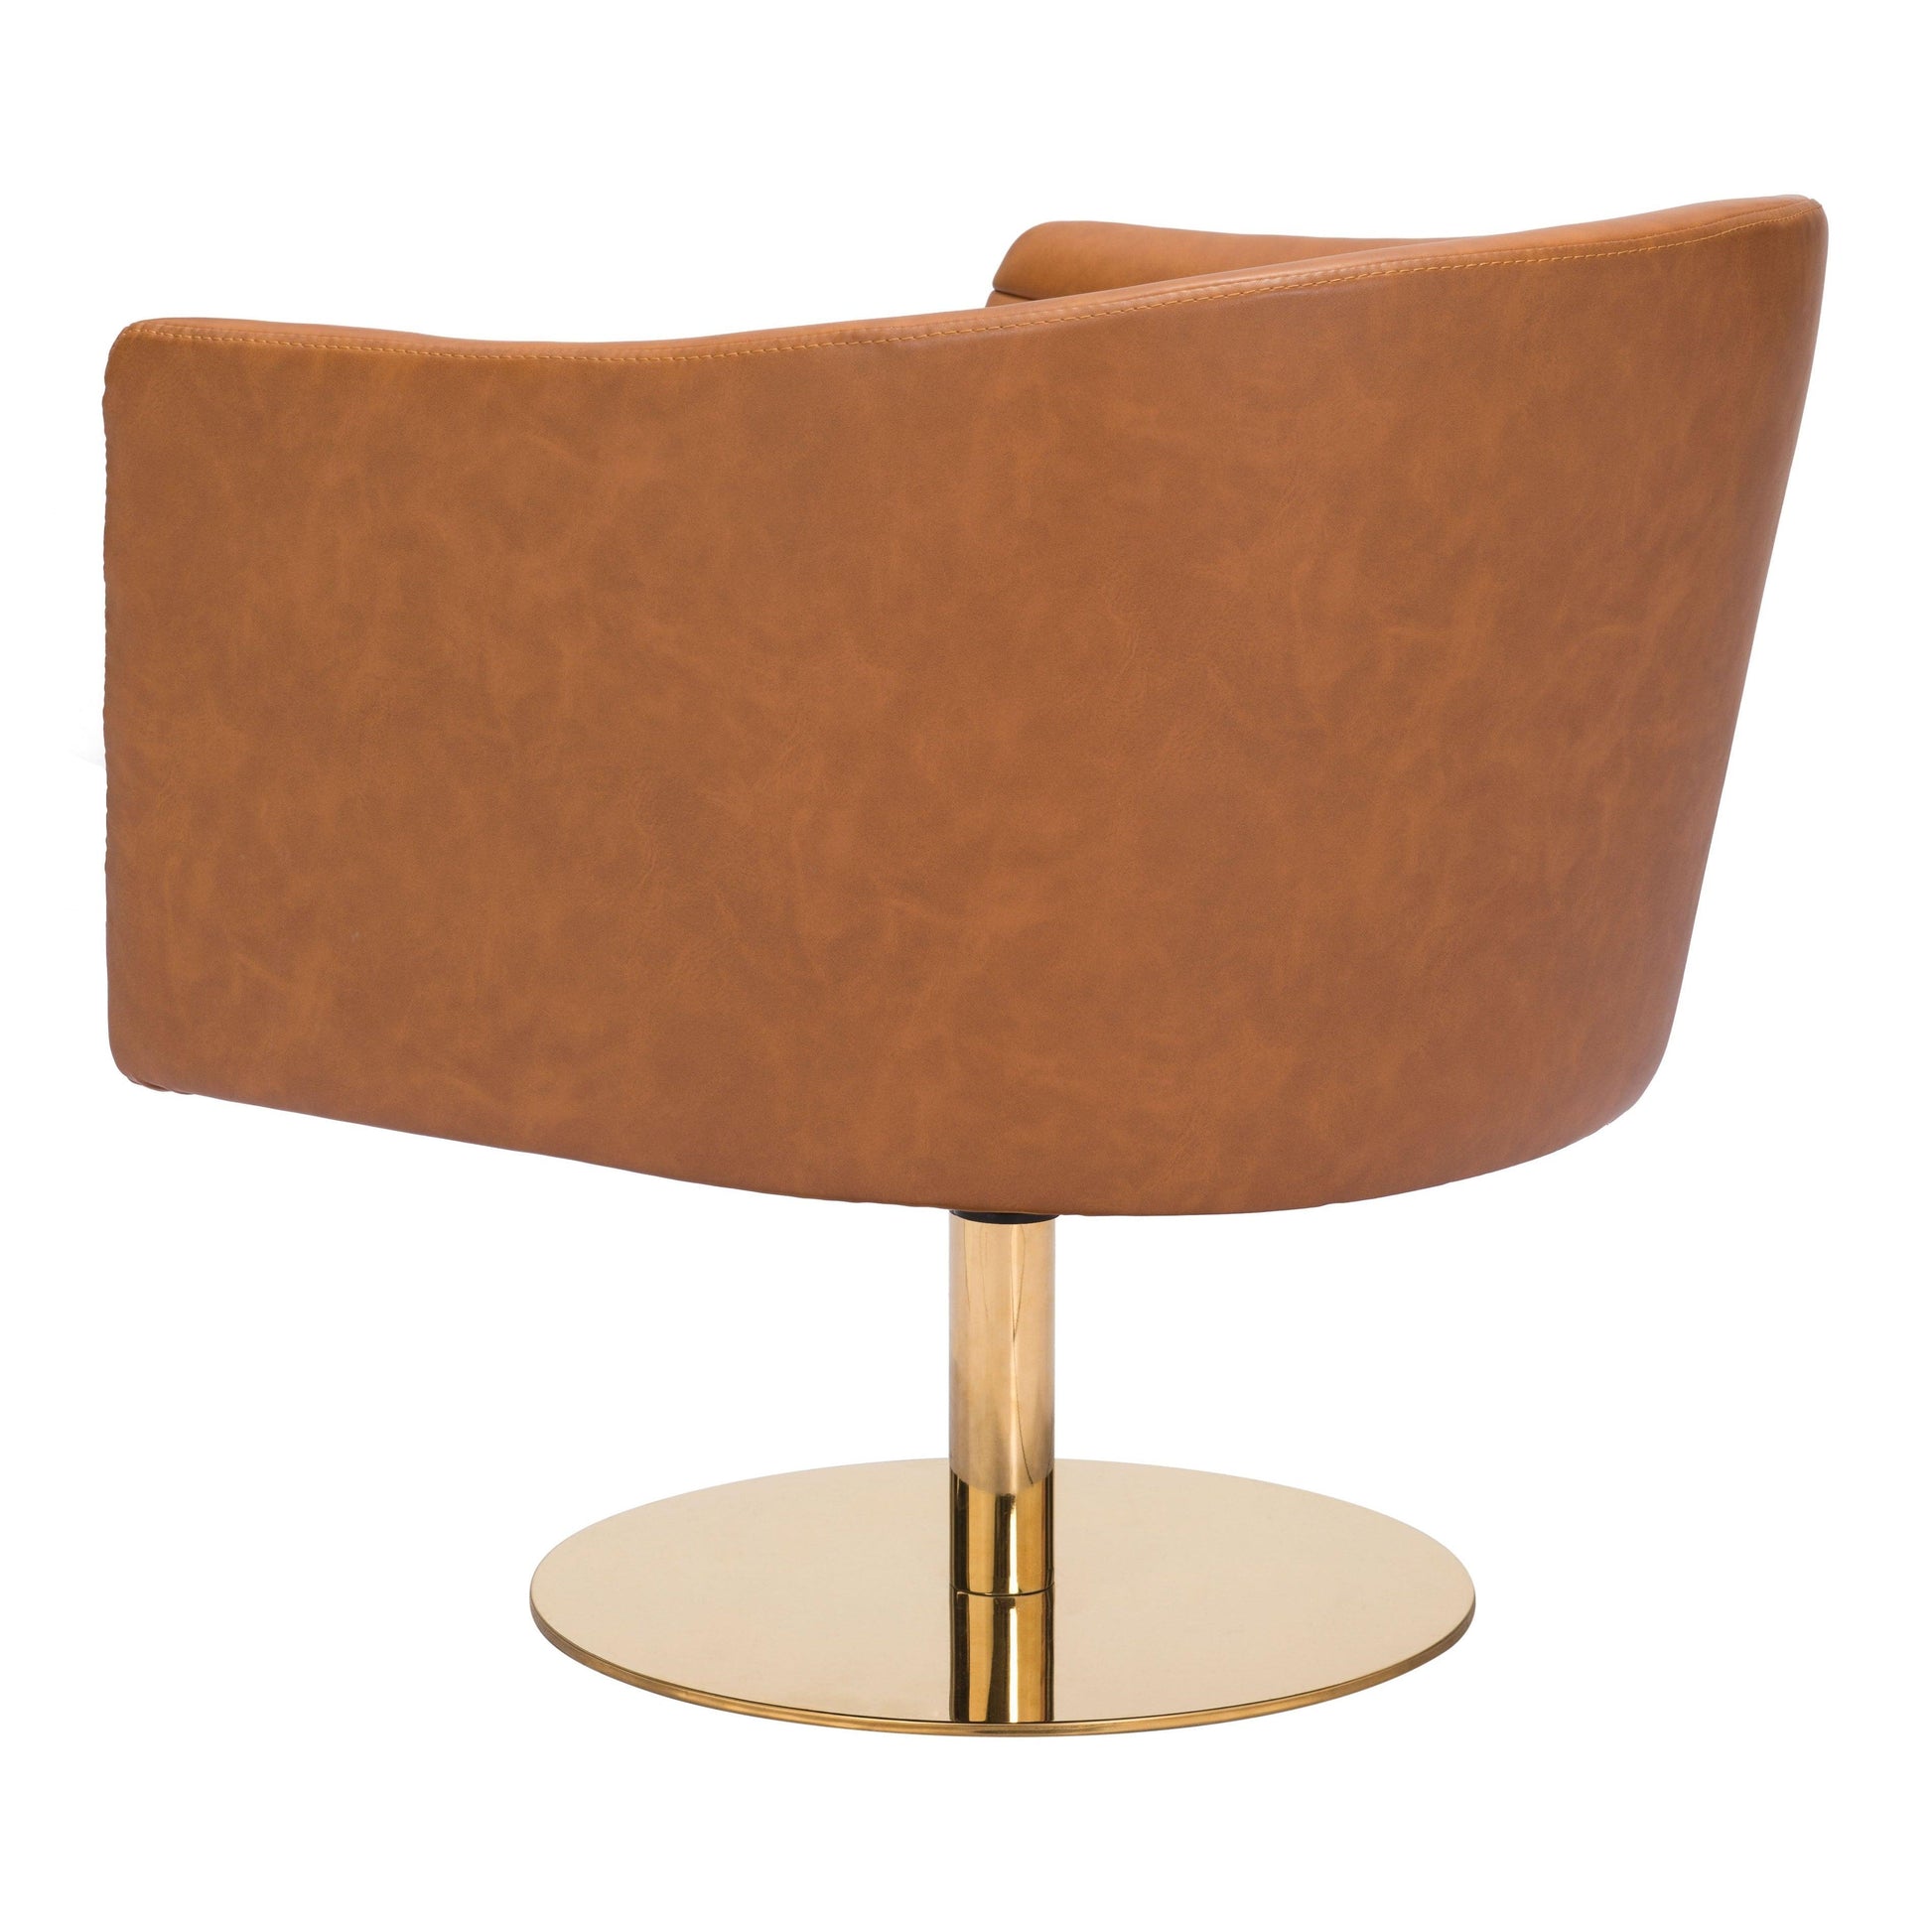 Justin Accent Chair Brown - Sideboards and Things Accents_Gold, Brand_Zuo Modern, Color_Brown, Color_Gold, Features_Swivel, Finish_Polished, Materials_Metal, Materials_Upholstery, Metal Type_Stainless Steel, Metal Type_Steel, Product Type_Occasional Chair, Upholstery Type_Leather, Upholstery Type_Vegan Leather